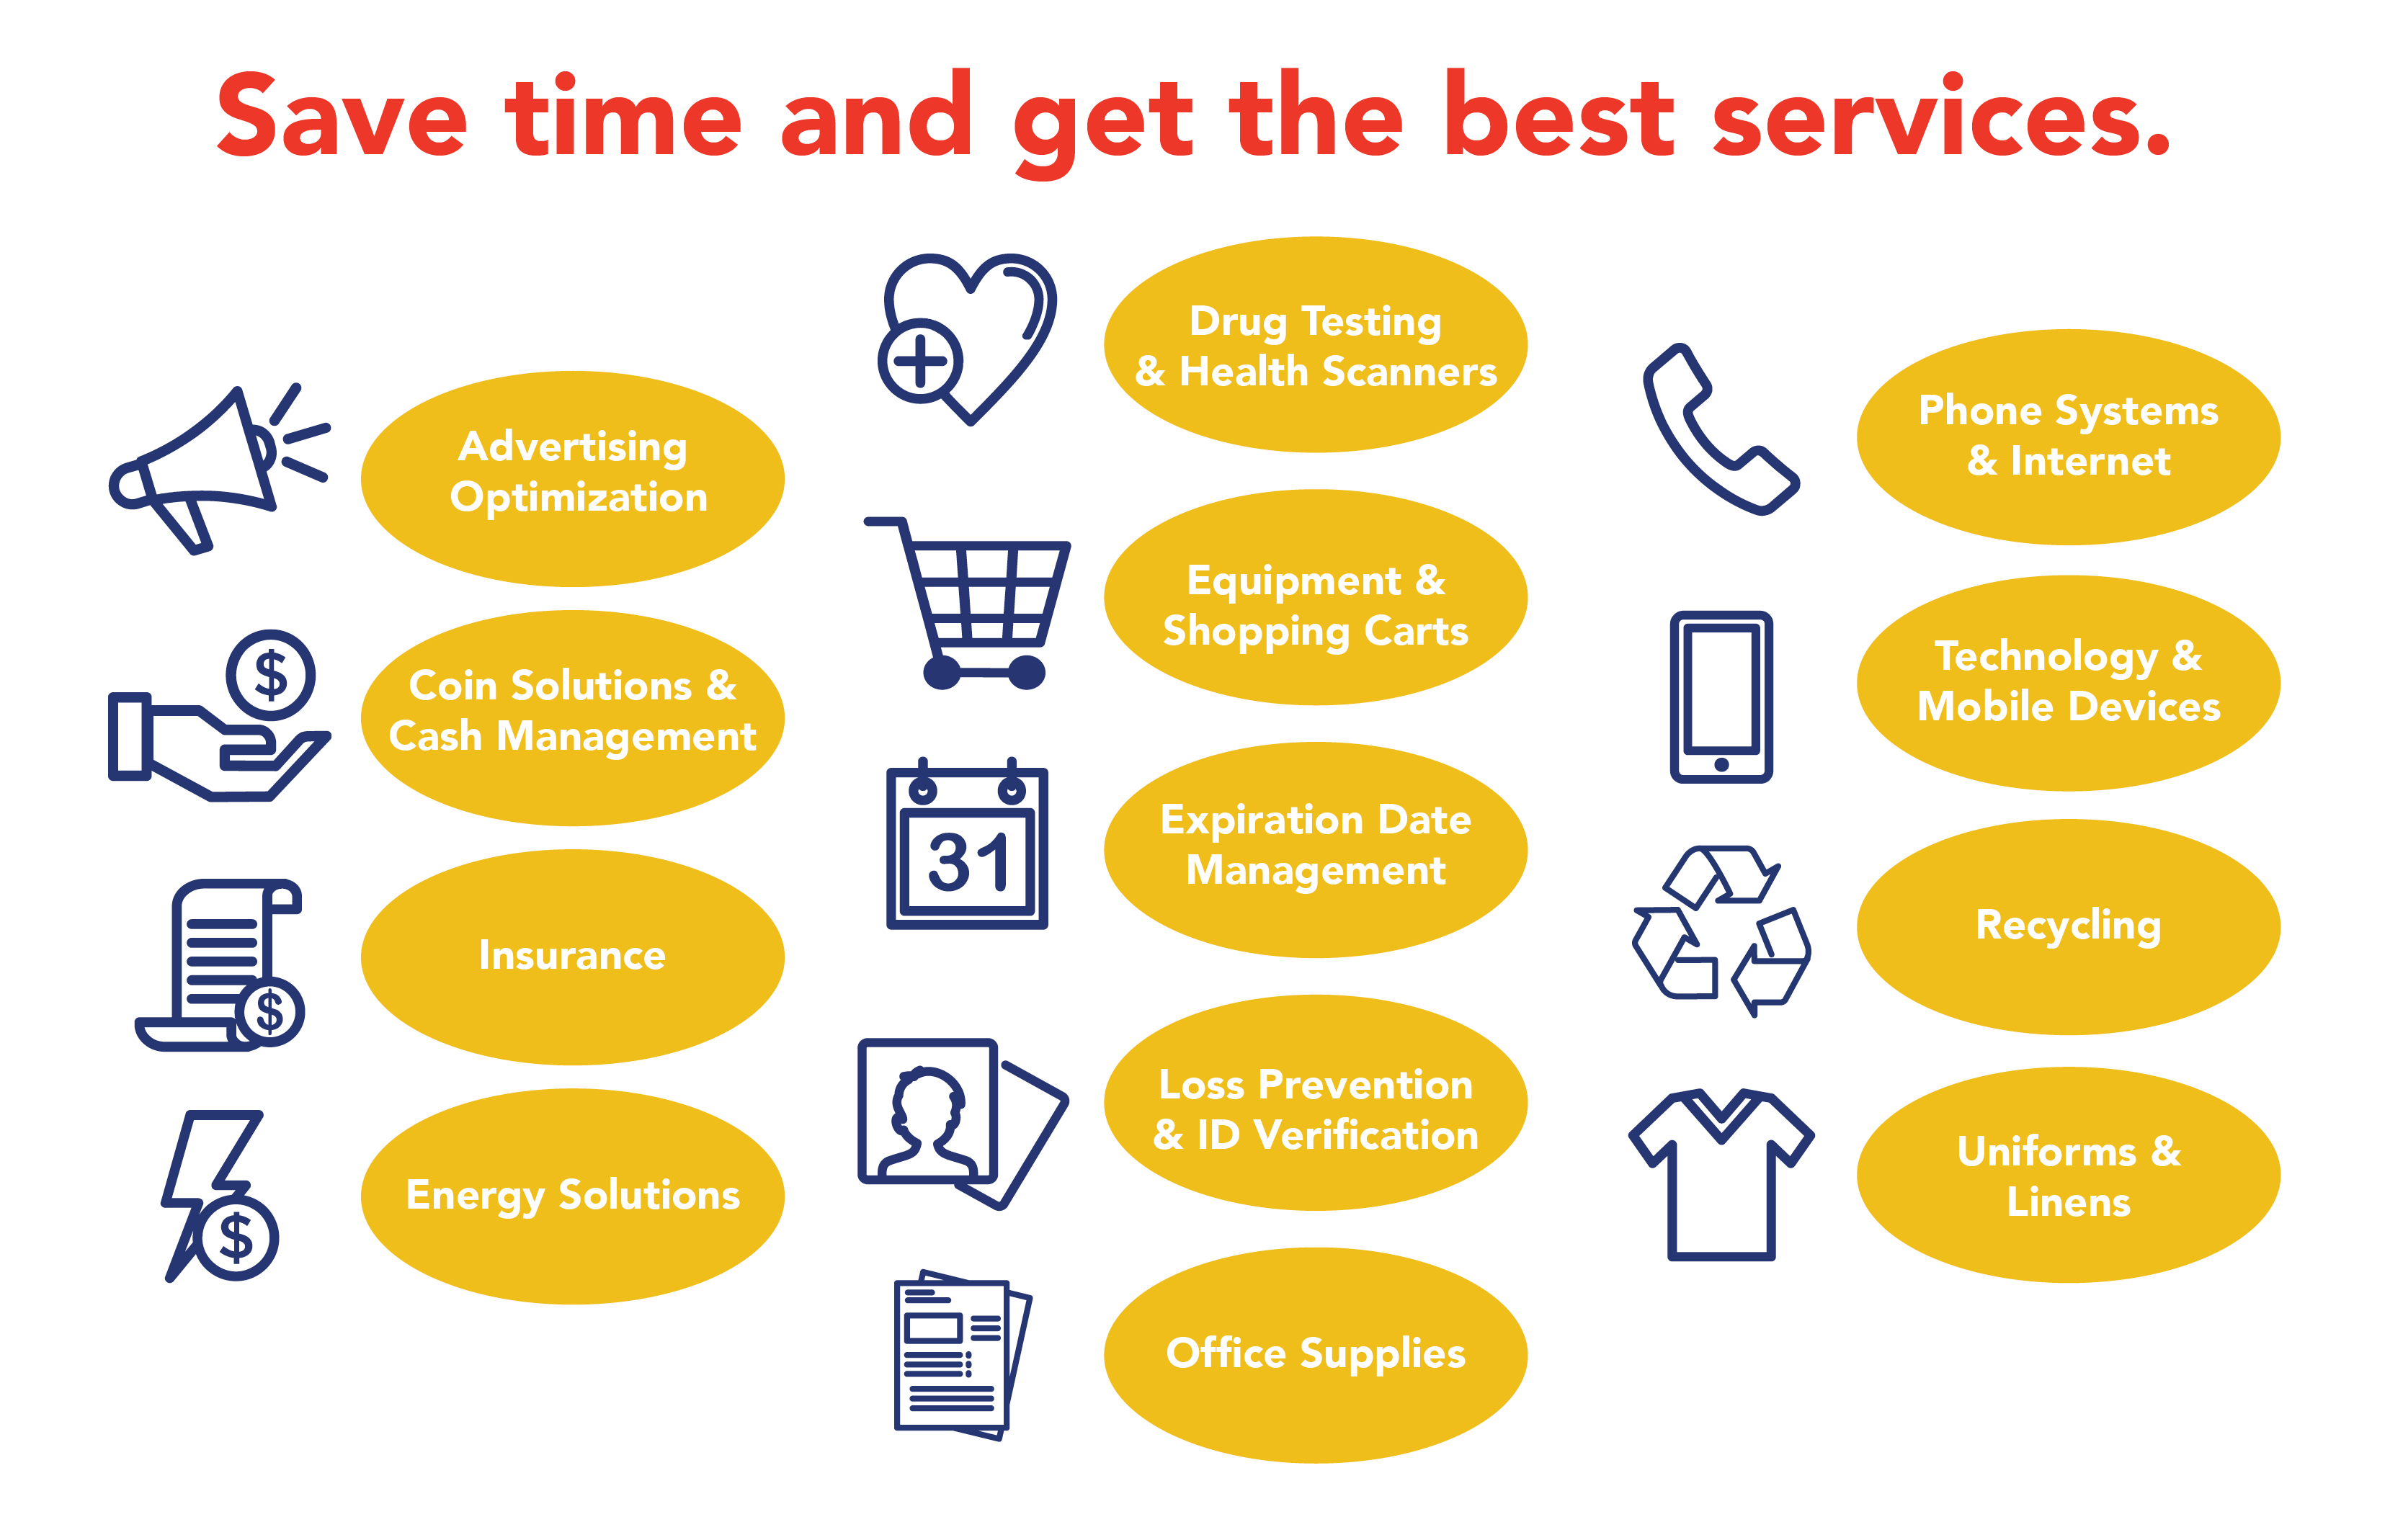 Save time and get the best services.